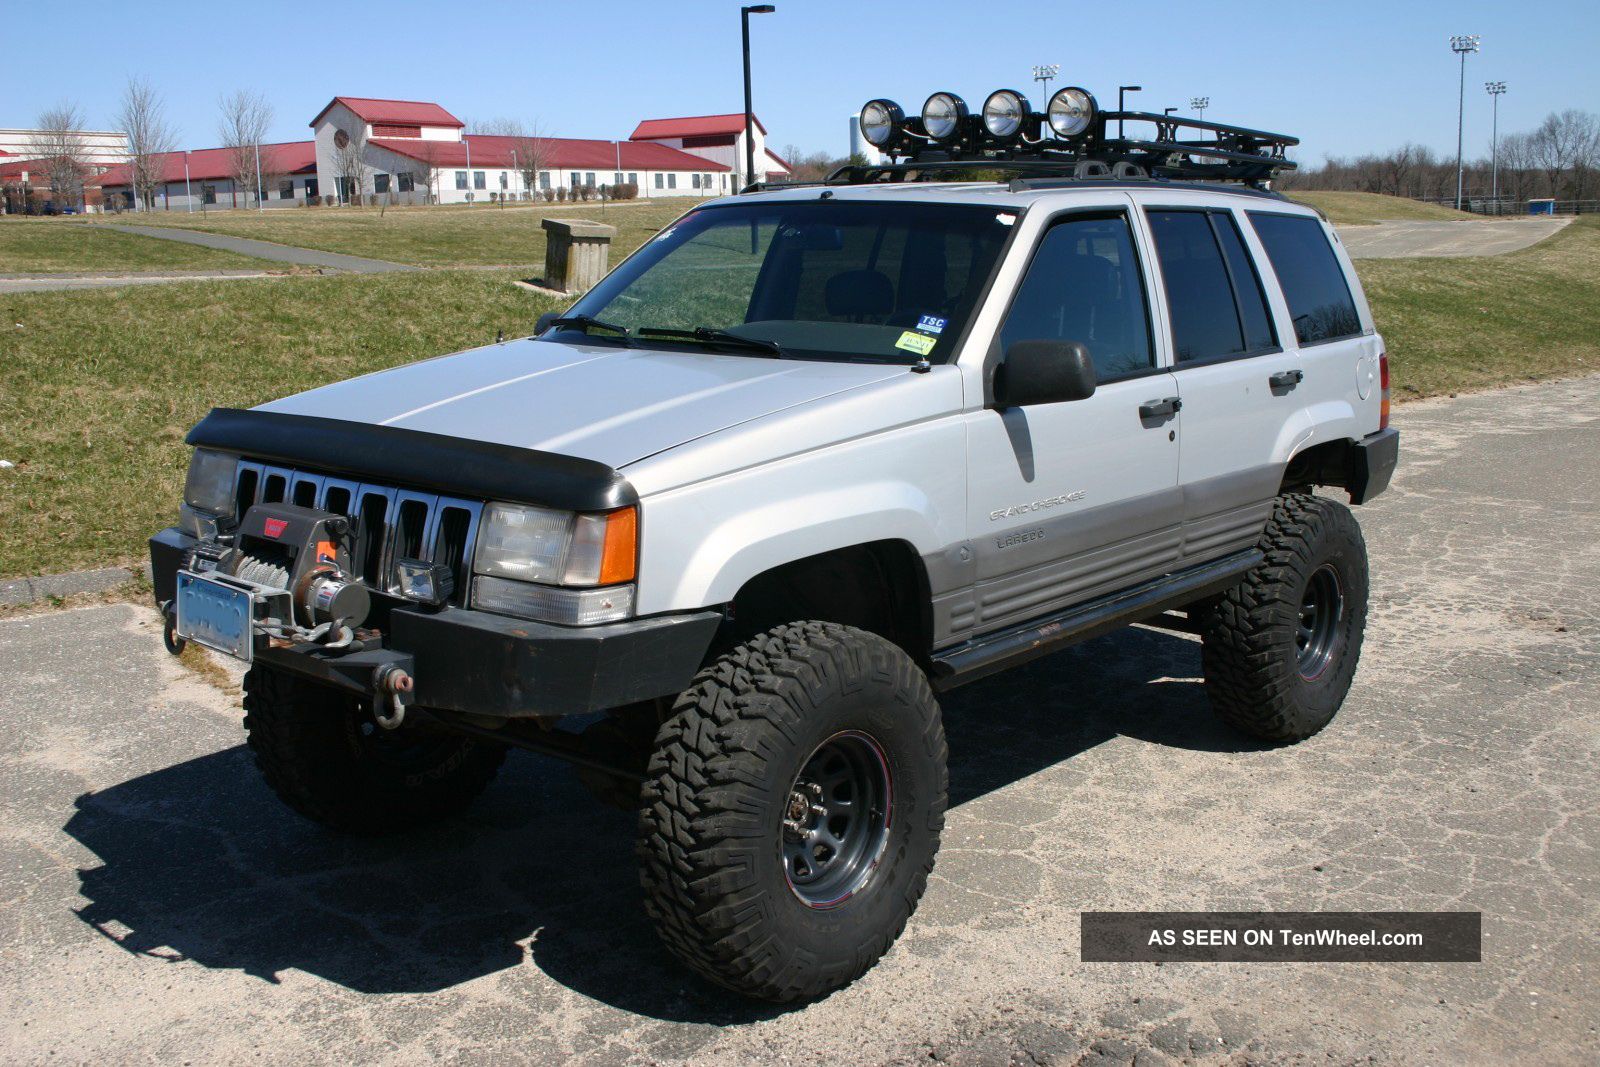 1996 Jeep cherokee tires size #5